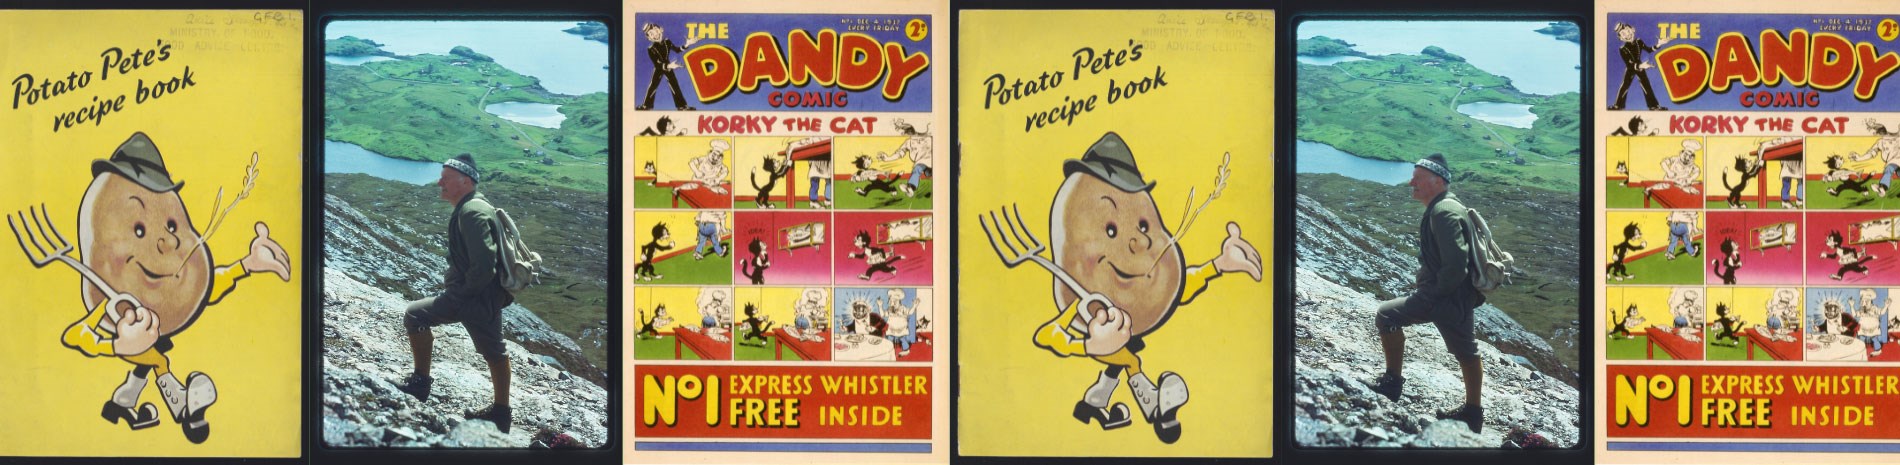 Images from items on display in the National Library of Scotland's 'Treasures' exhibition. From left to right: the bright yellow cover of Potato Pete's Recipe Book; a photograph of Tom Weir wearing his bonnet on a mountainside; and the front cover of the 1917 edition of the Dandy comic.